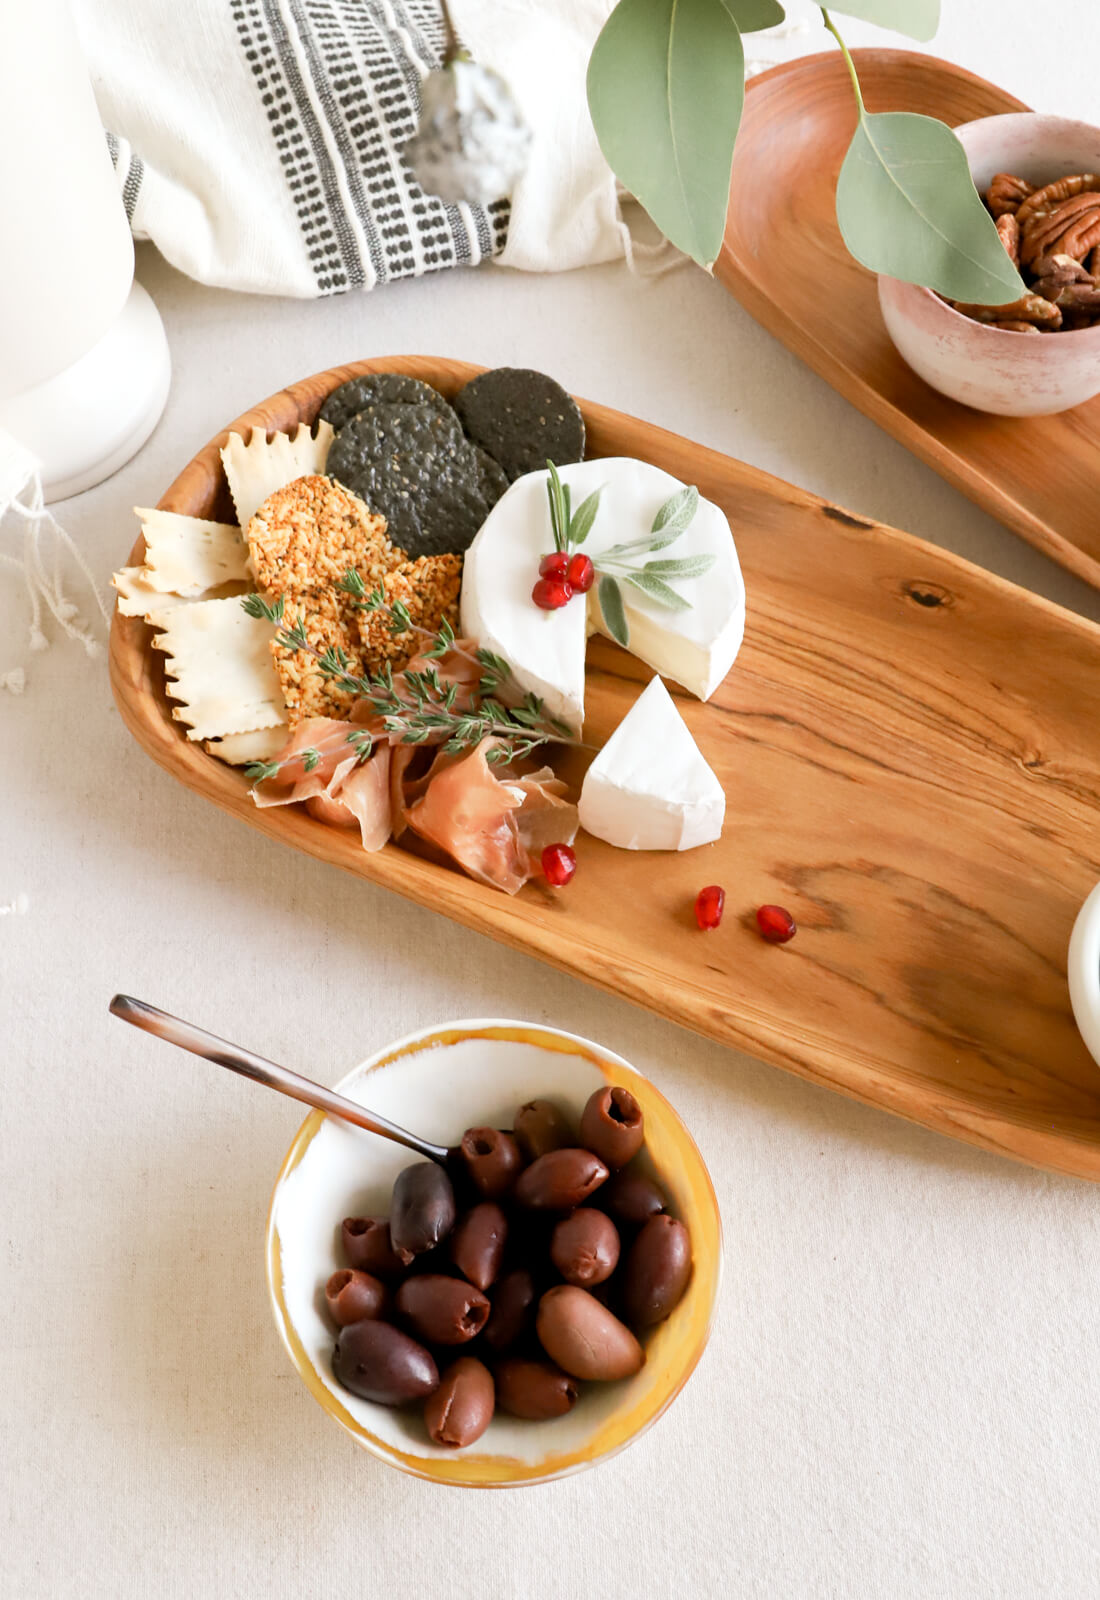 Snack serving bowl made out of cowhorn, styled on a dining room table next to a charcuterie board.